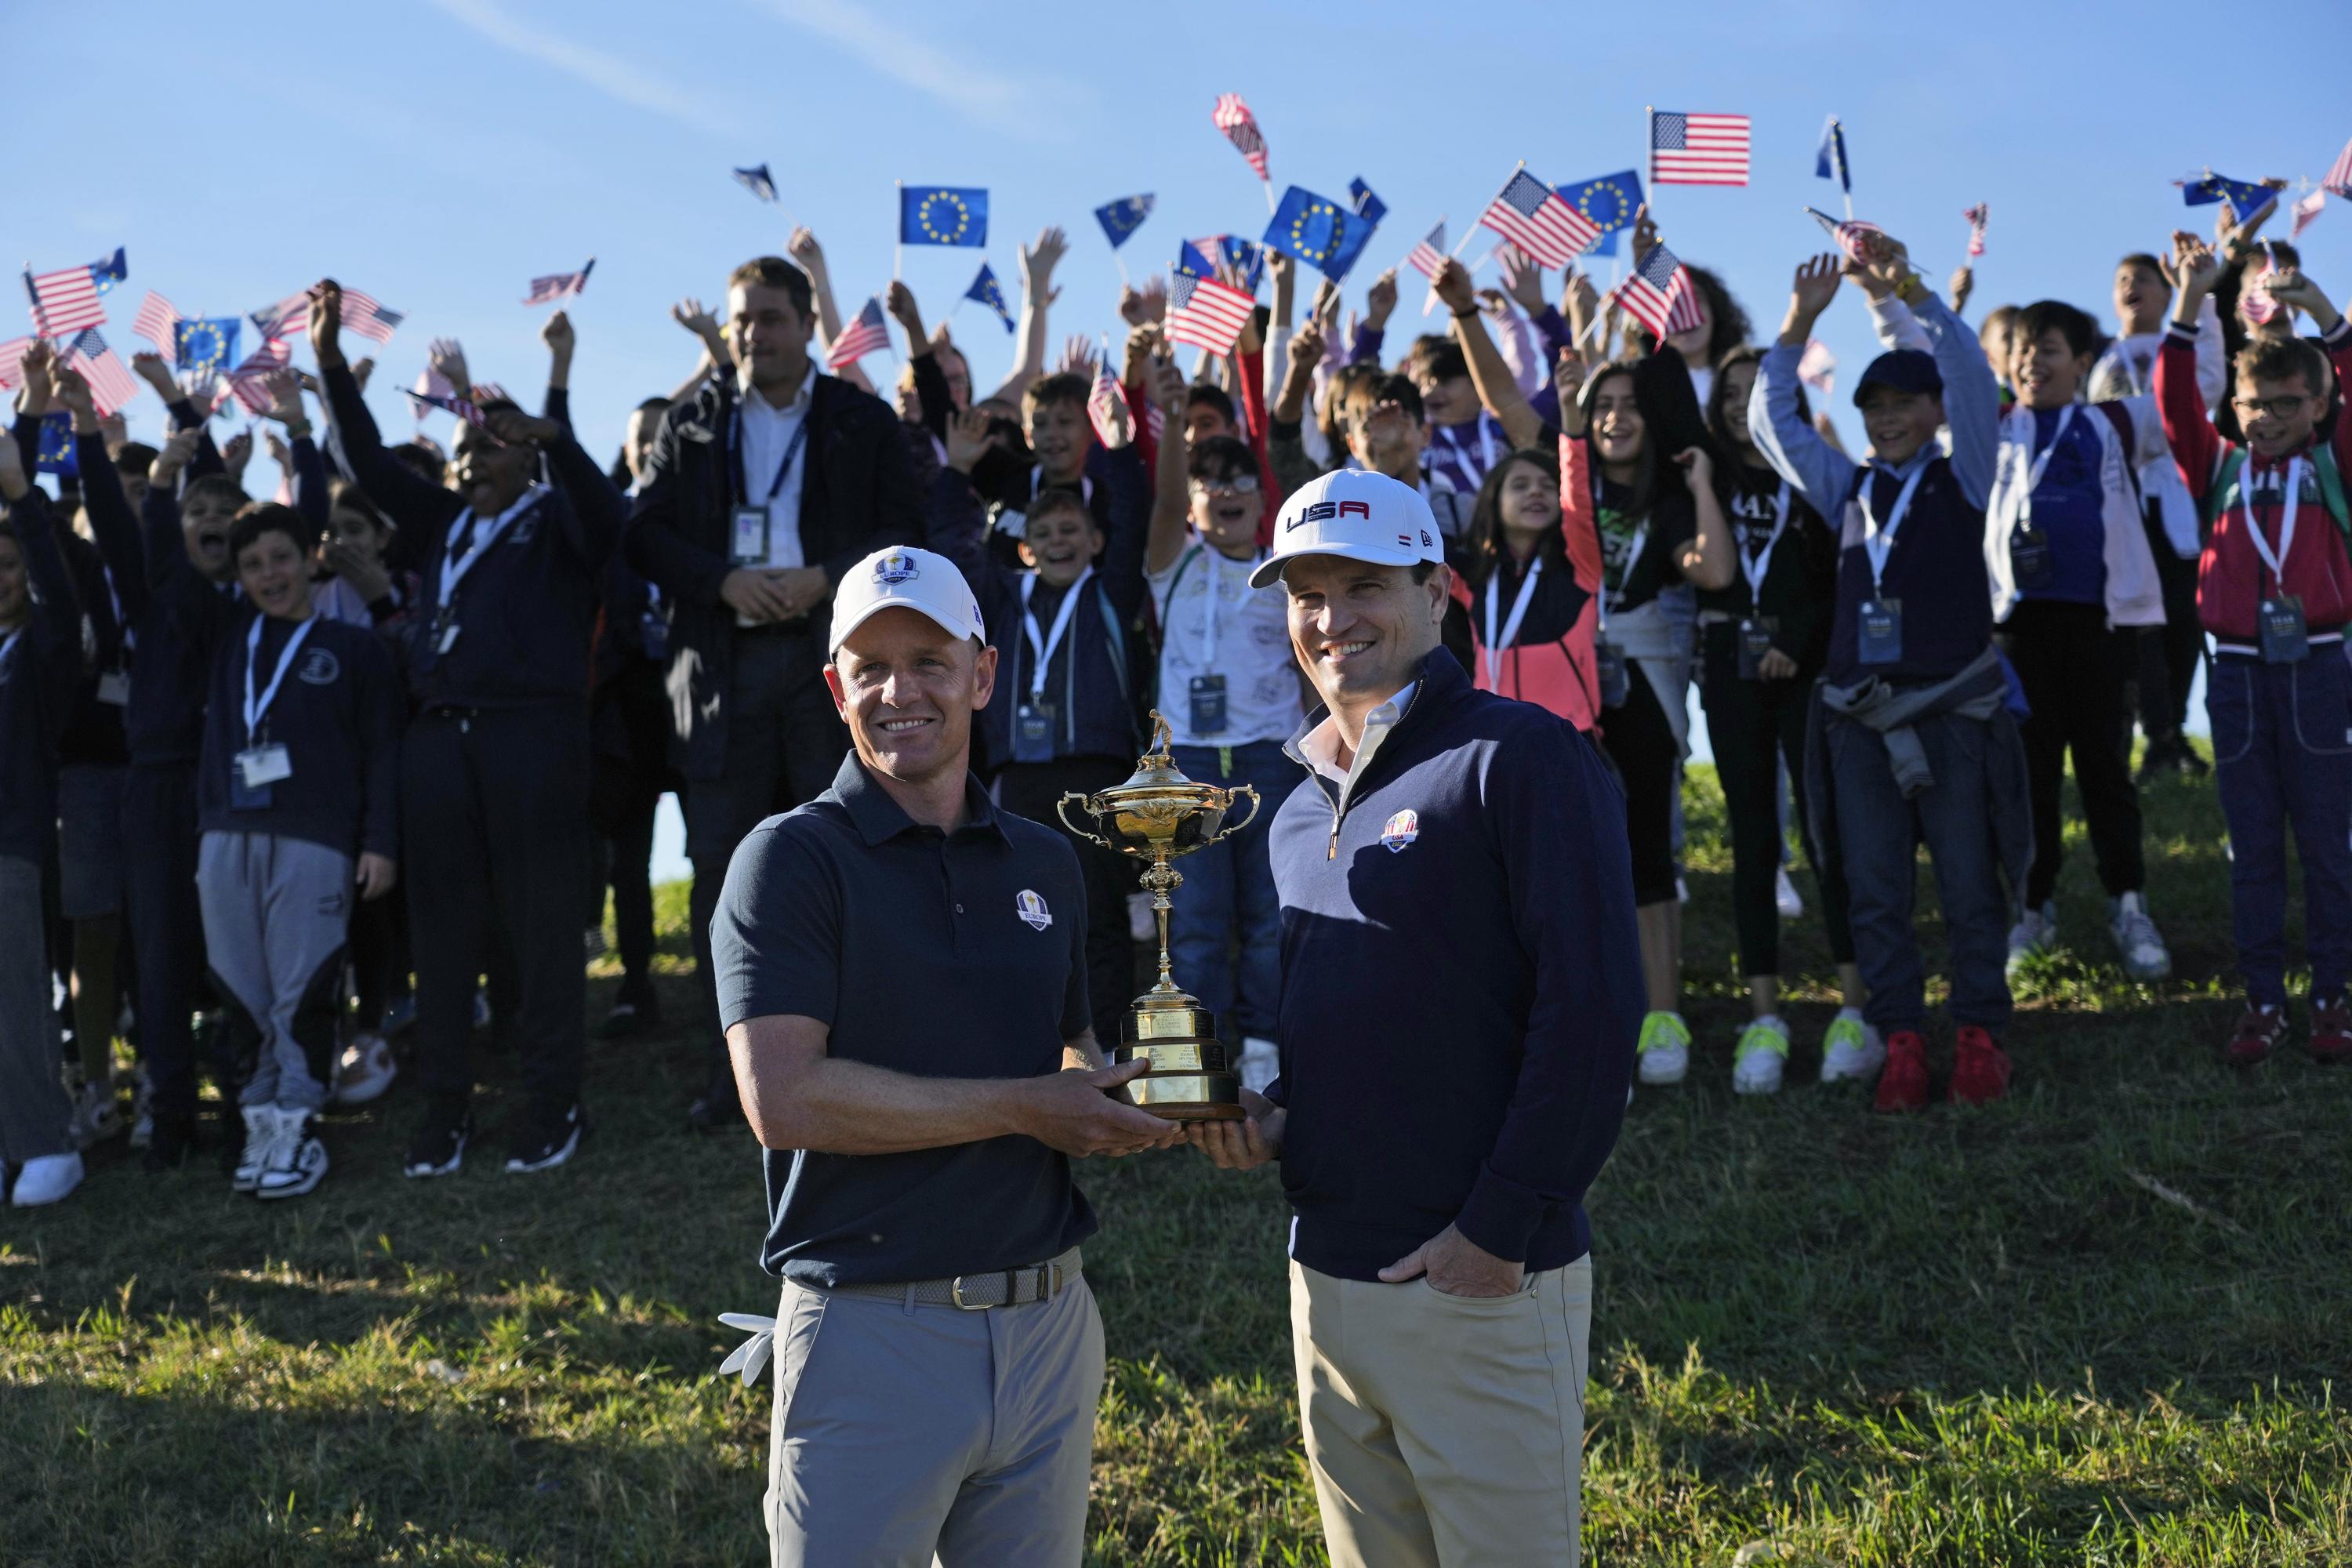 AP Interview Ryder Cup director concerned for Italian fans AP News